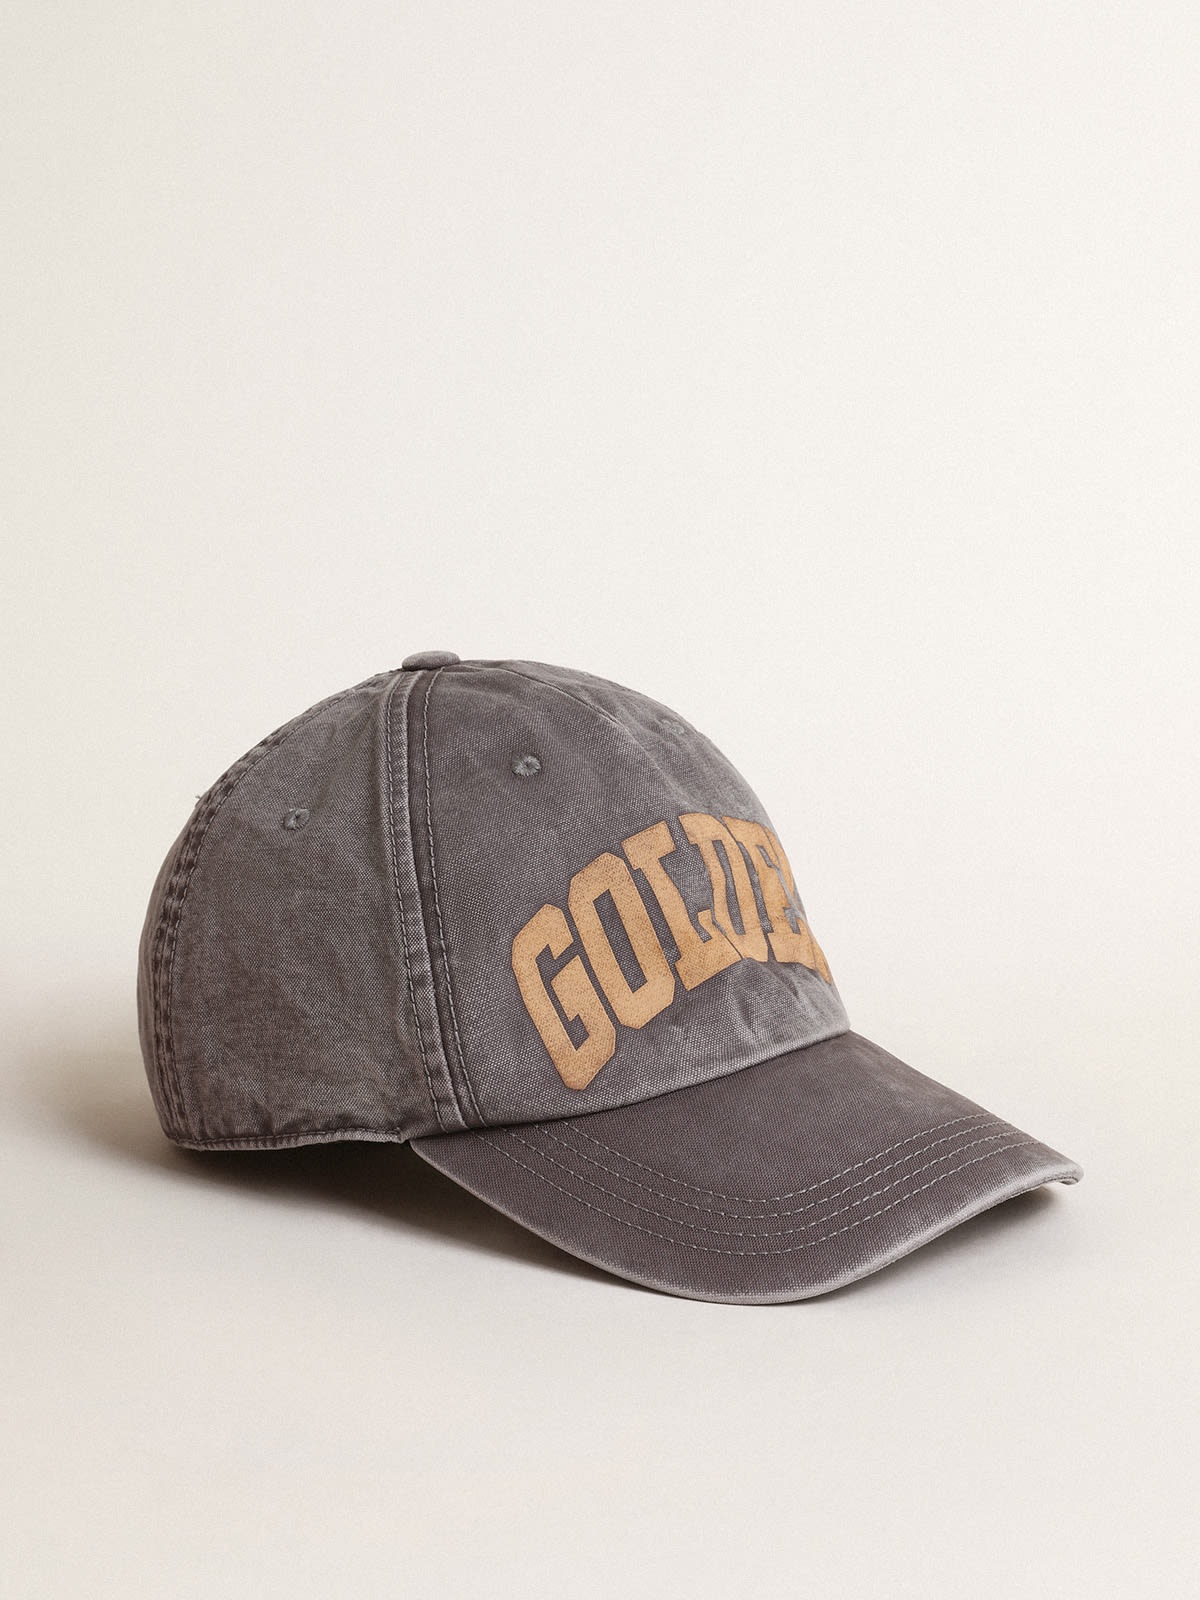 Hat in lilac-gray cotton with Golden lettering on the front - 2